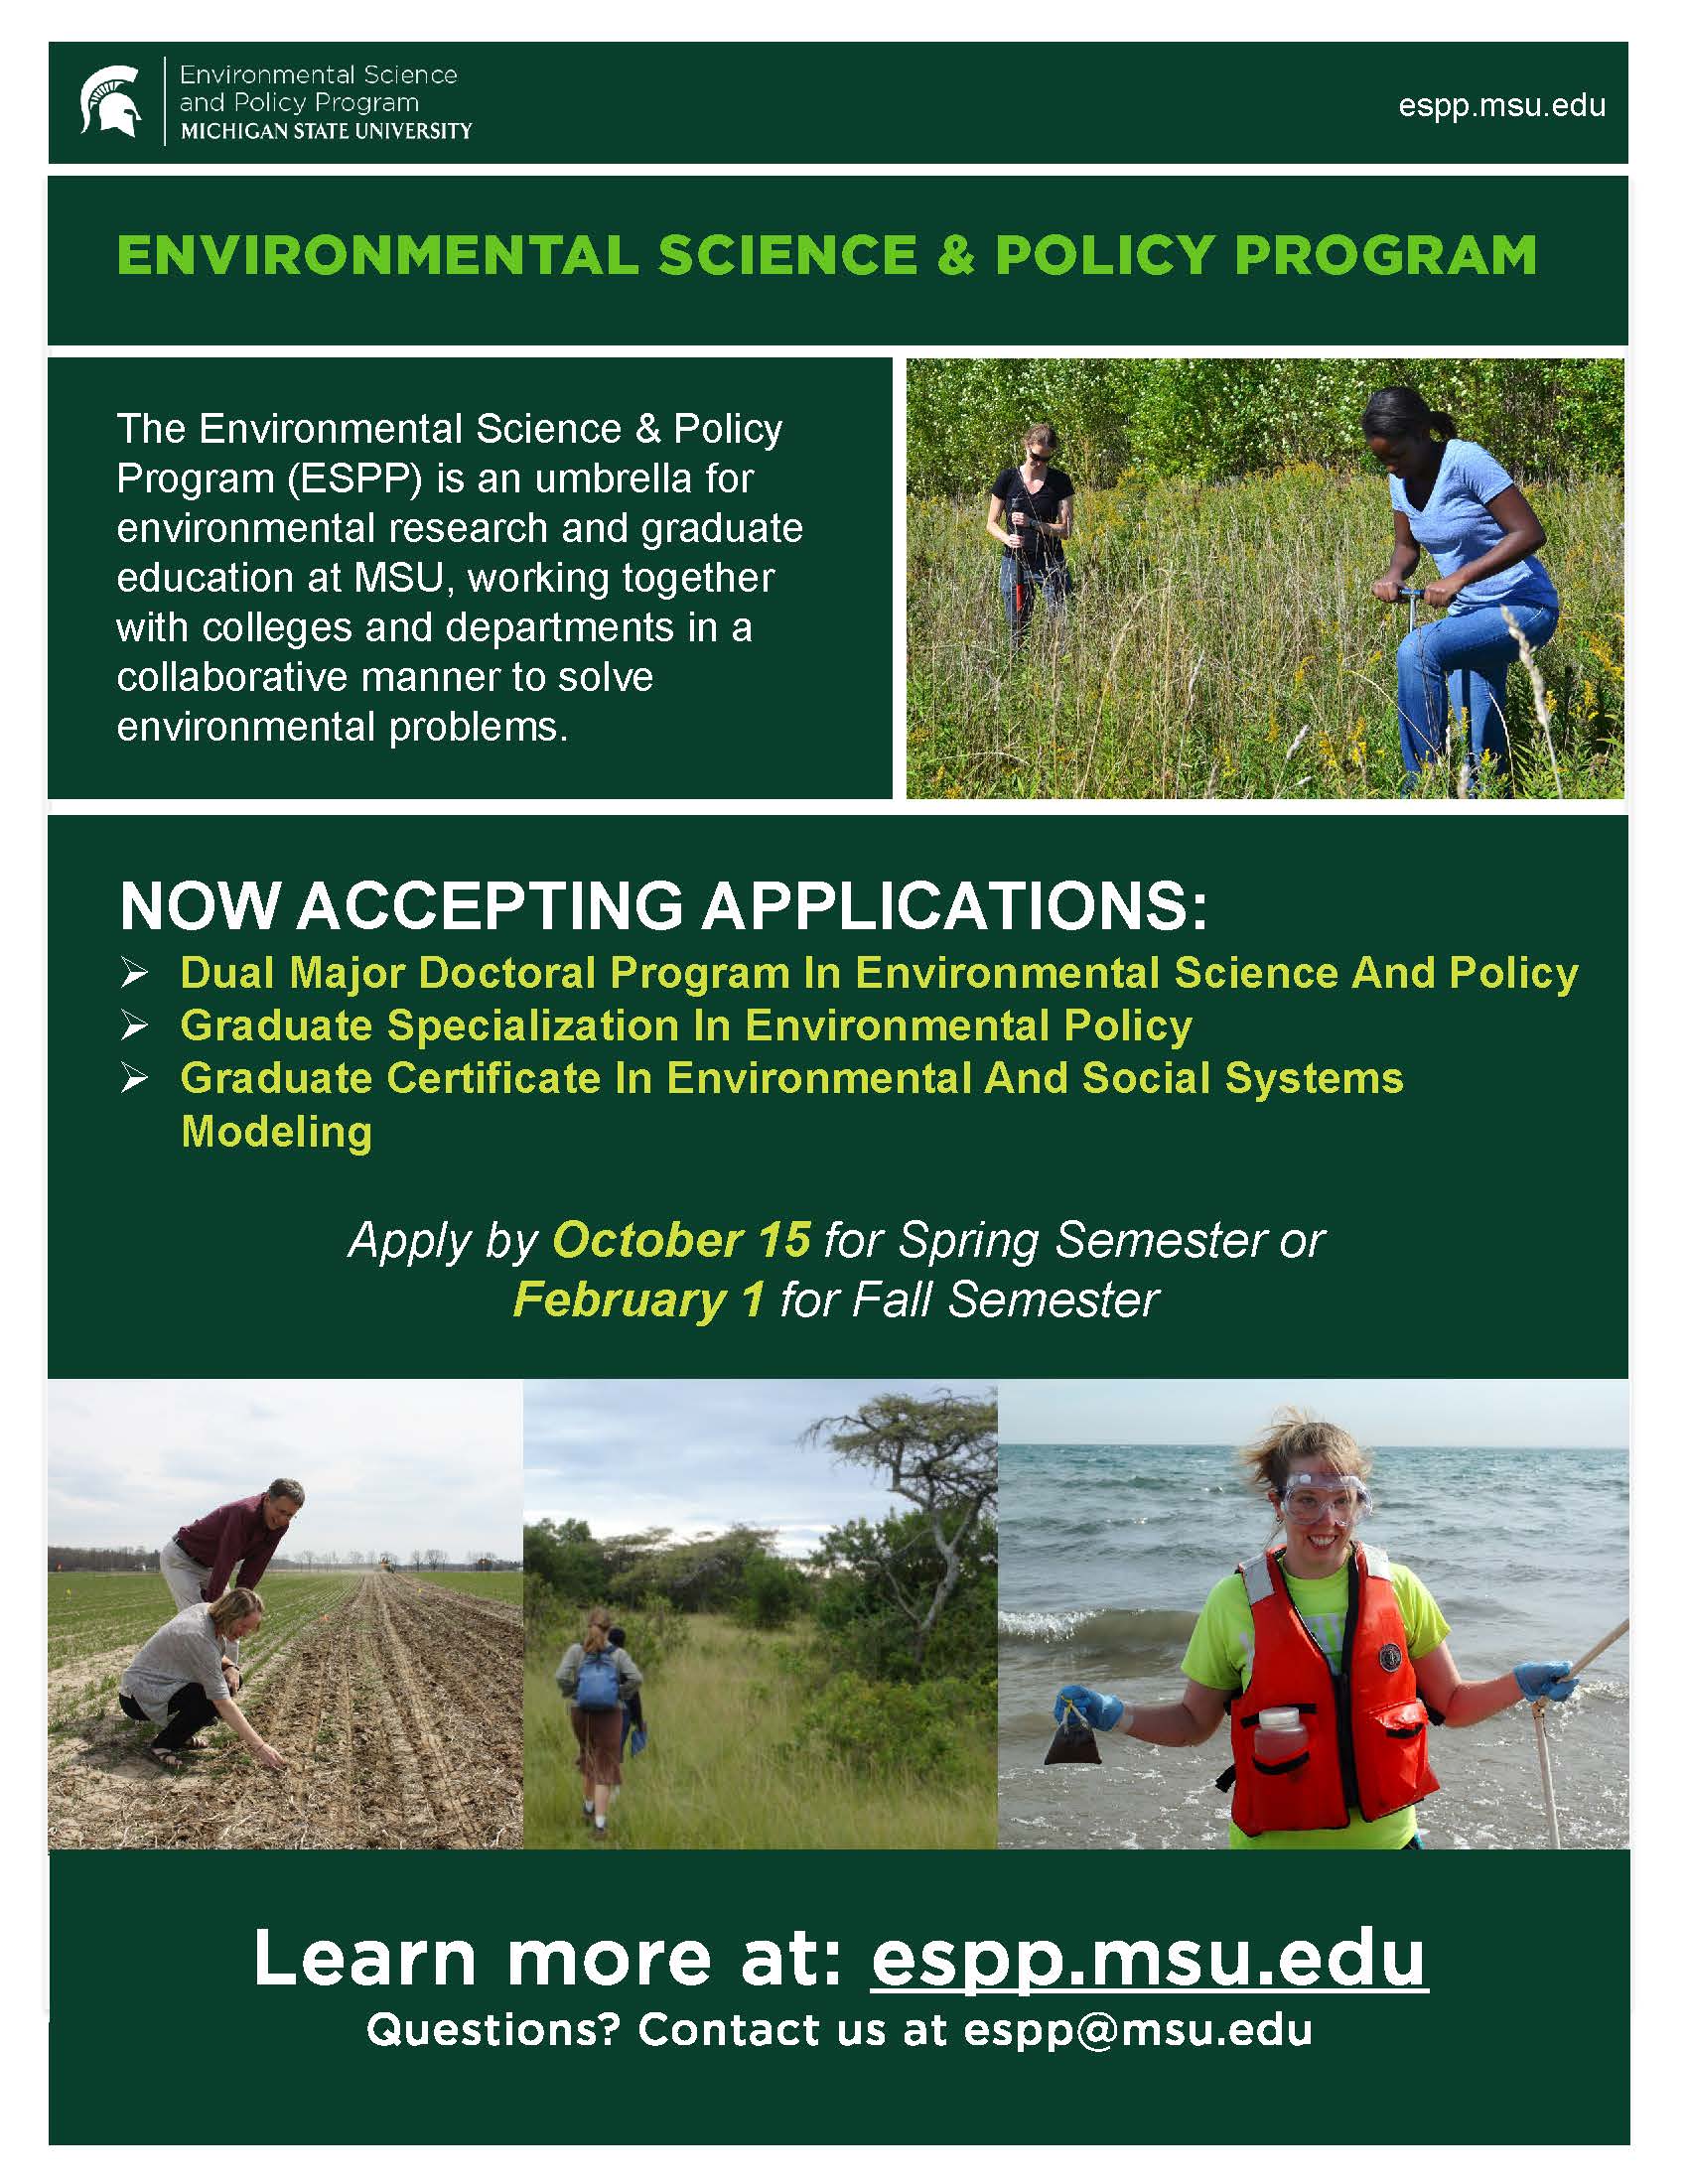 ESPP now accepting applications for the 2022 Spring Semester. Deadline October 15, 2021